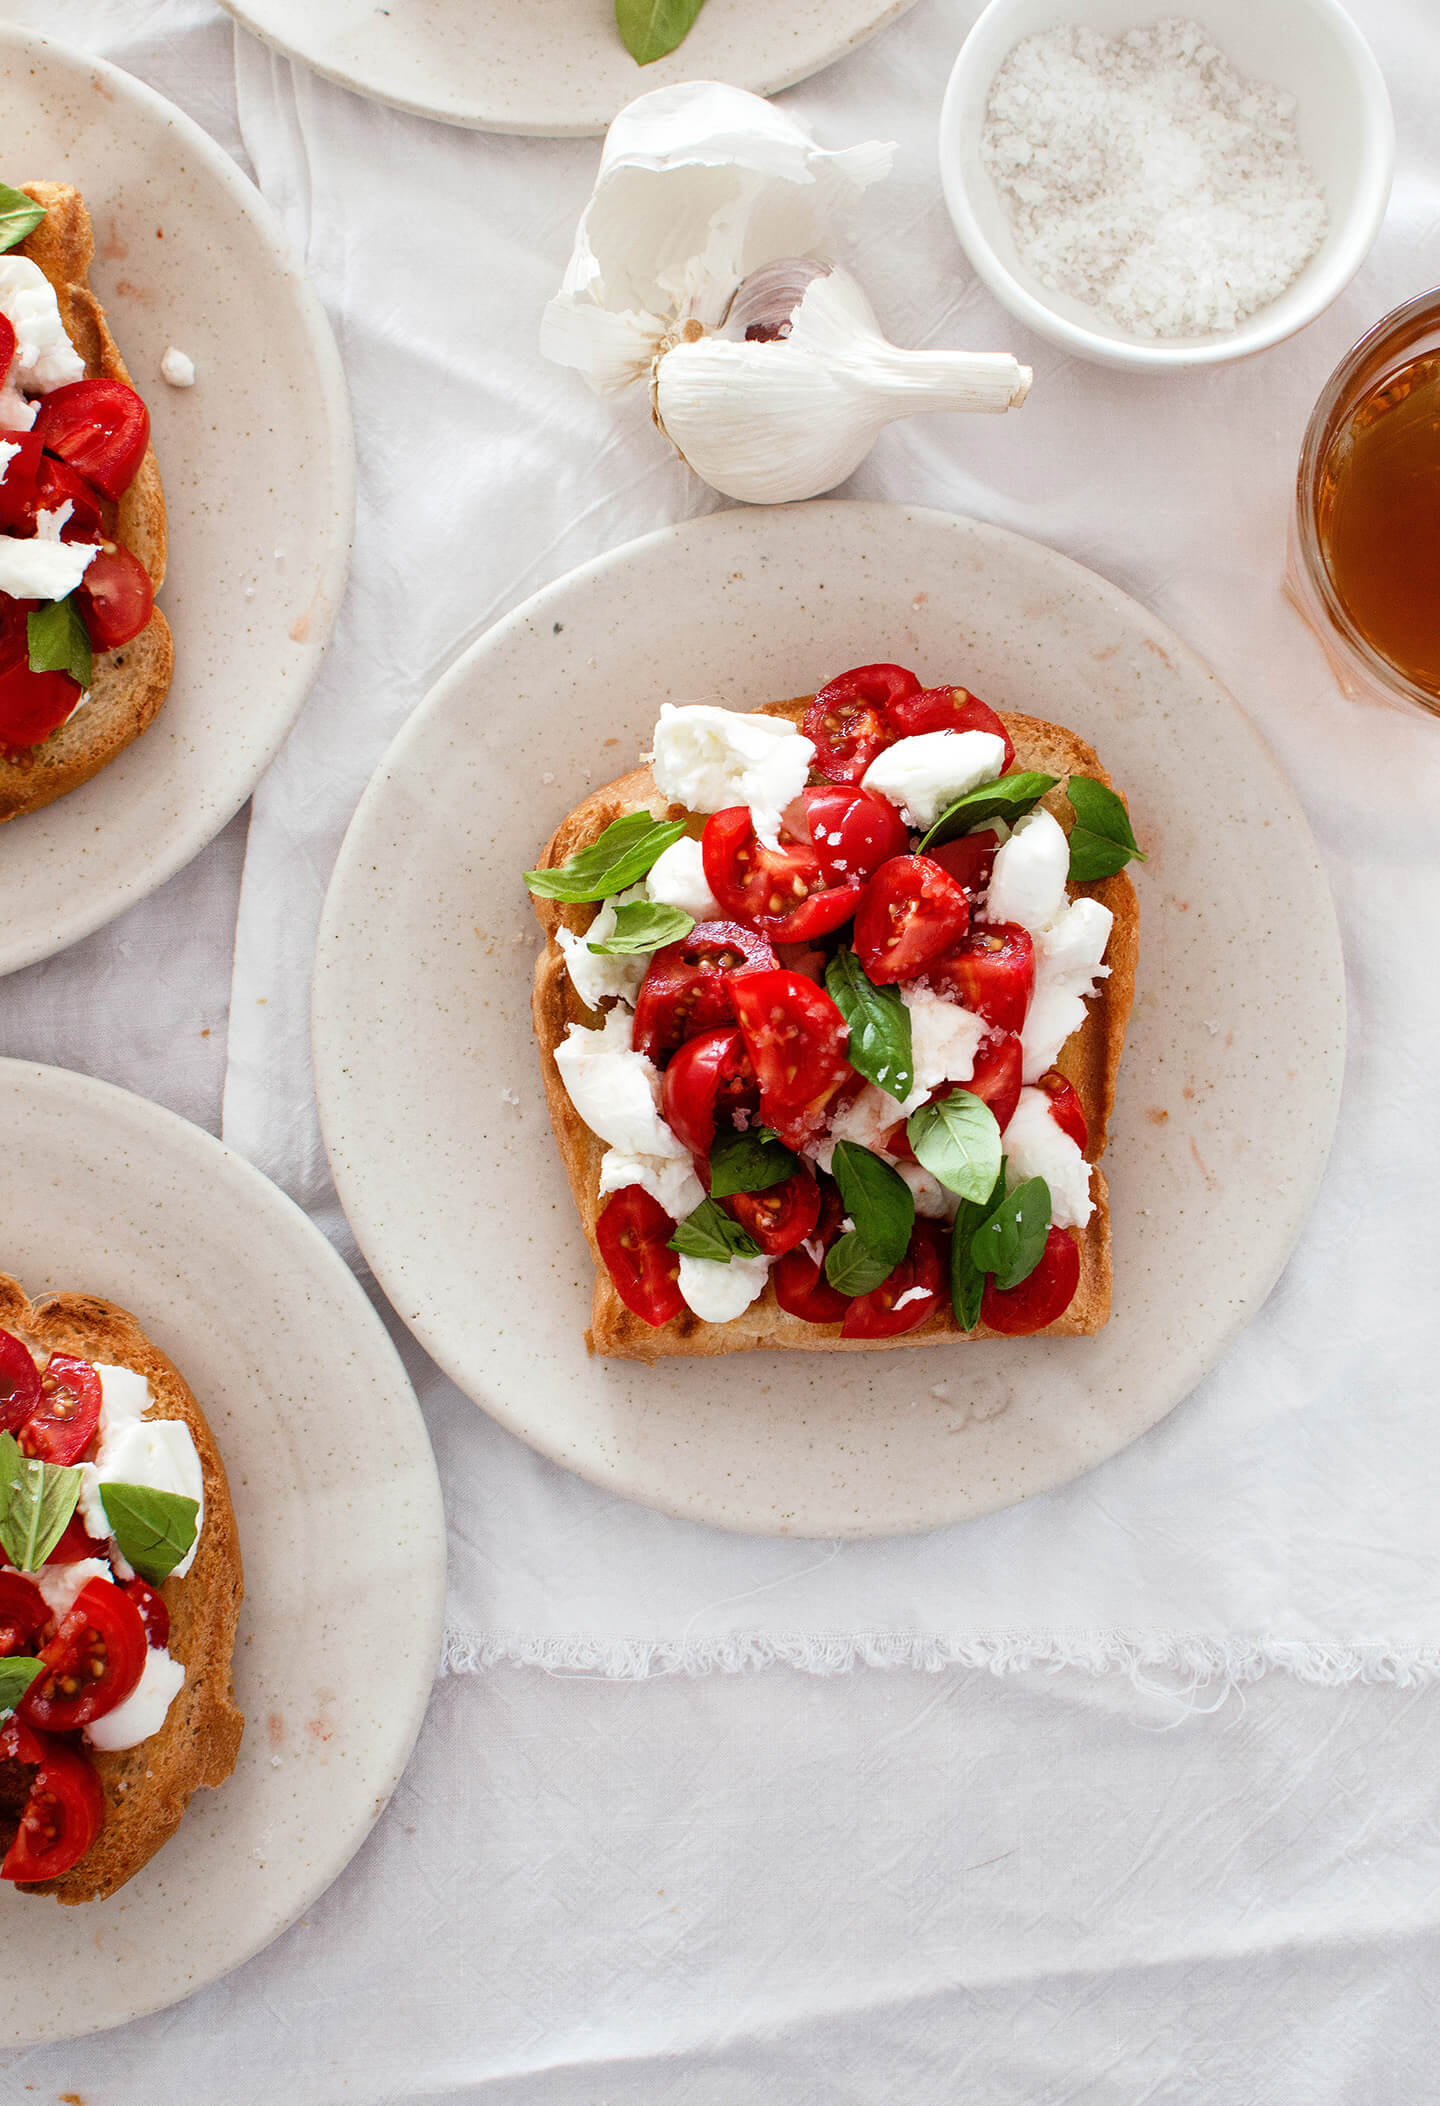 bruschetta-style tomato mozzarella toast makes the perfect breakfast or lunch! Made with fresh, sweet tomatoes and milky mozzarella, it is simple yet extremely satisfying!